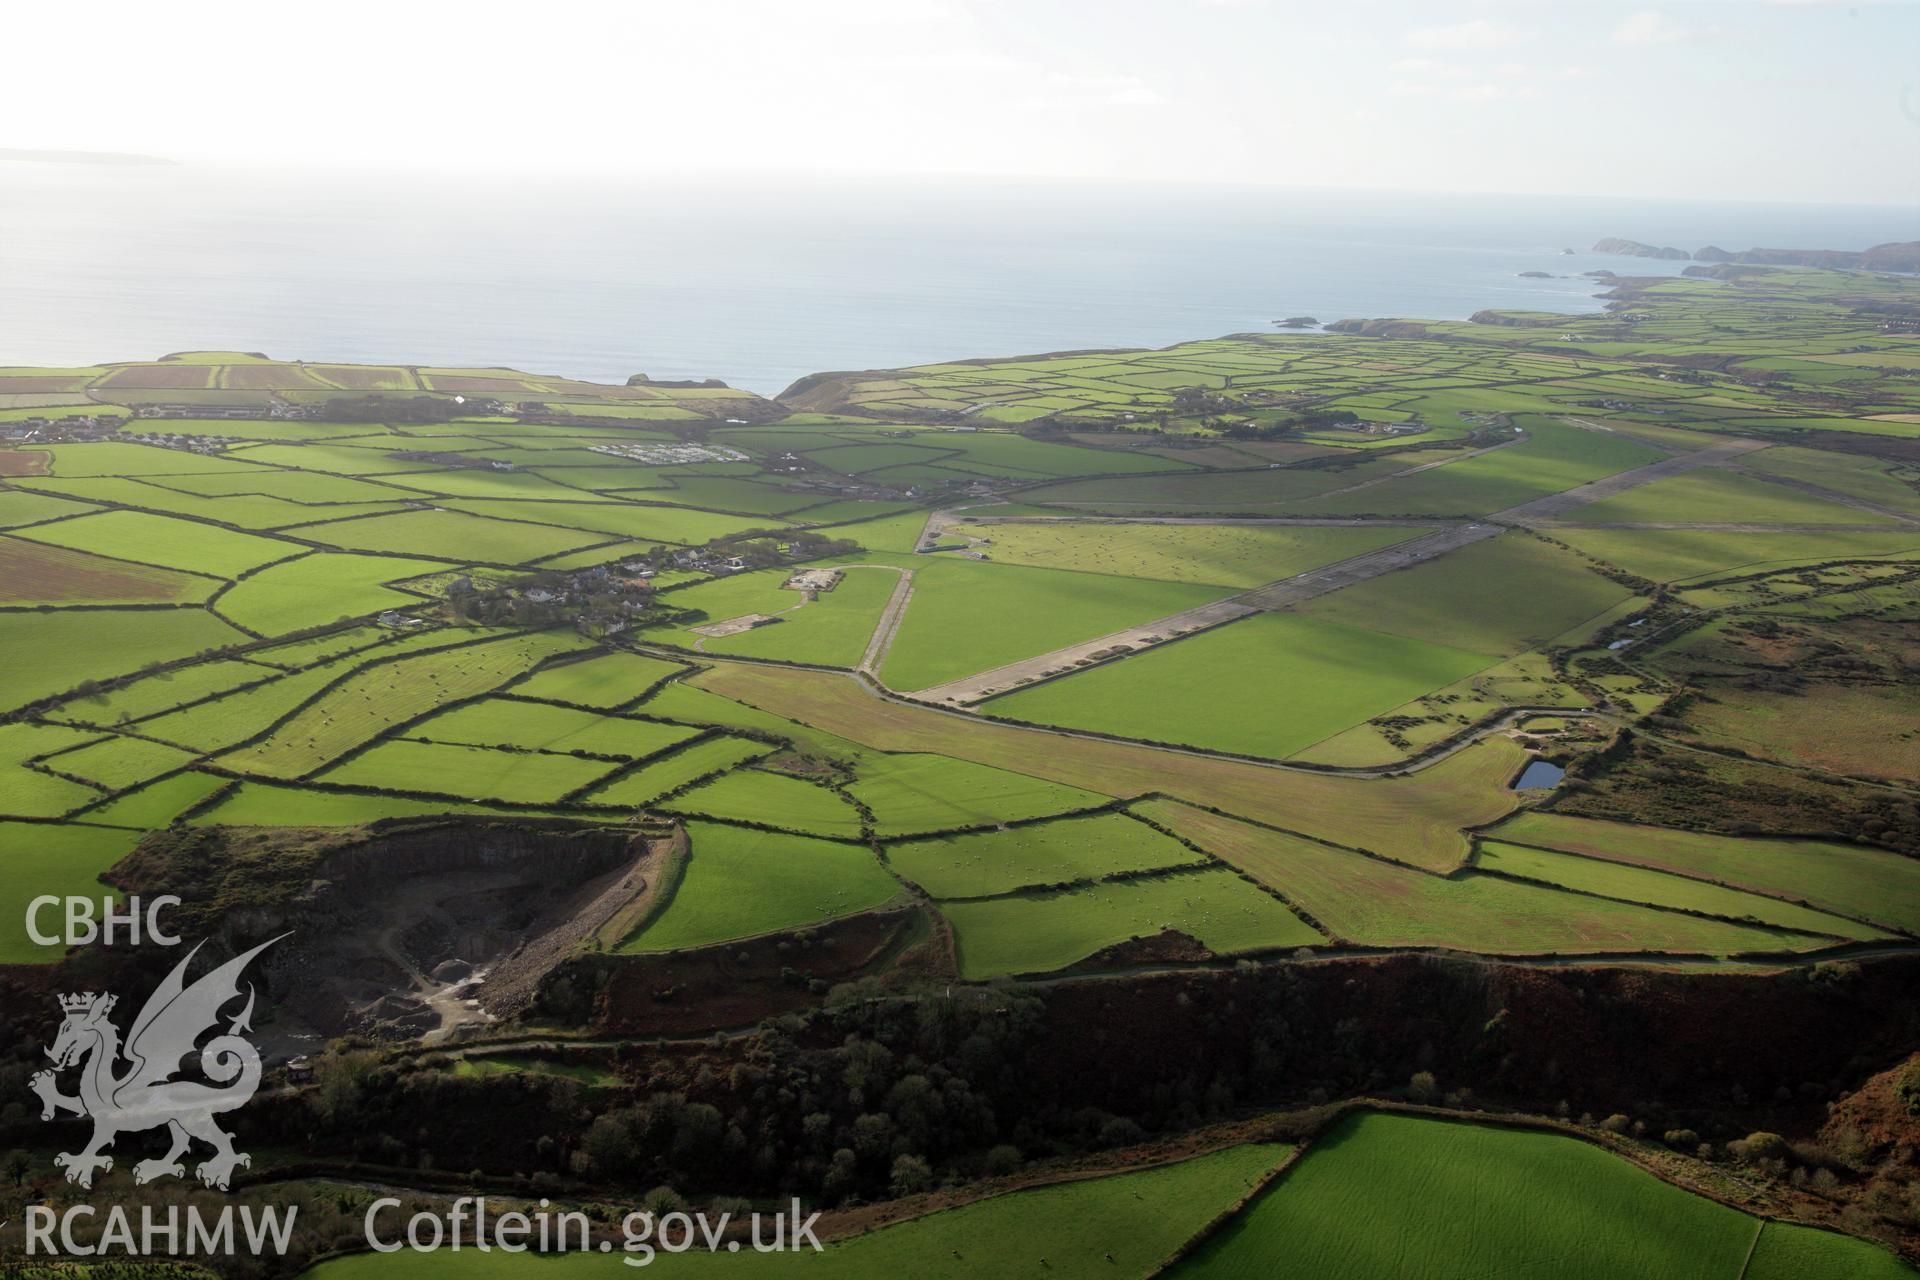 RCAHMW colour oblique photograph of St Davids Airfield, viewed from the north. Taken by O. Davies & T. Driver on 22/11/2013.